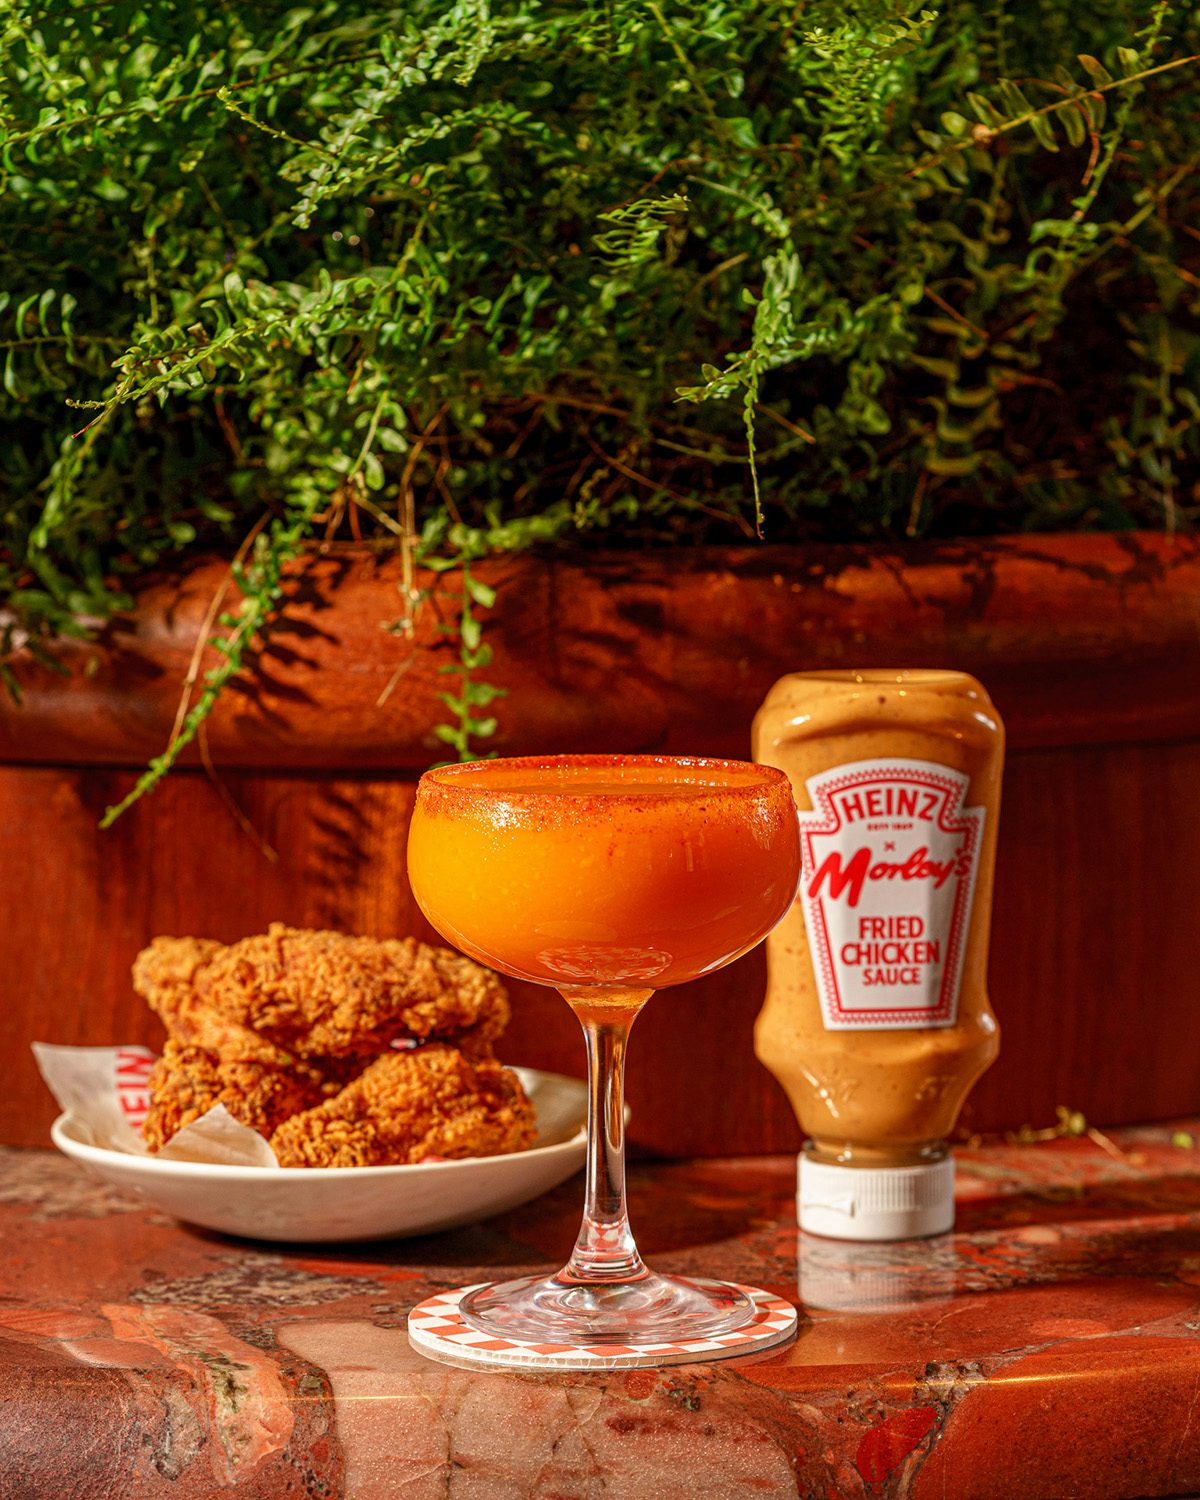 Photograph showing an orange drnik in a cocktail glass, a plate of fried chicken, and a squeezy bottle of Heinz and Morley's Fried Chciken Sauce, arranged on a marbled table with a plant in the background